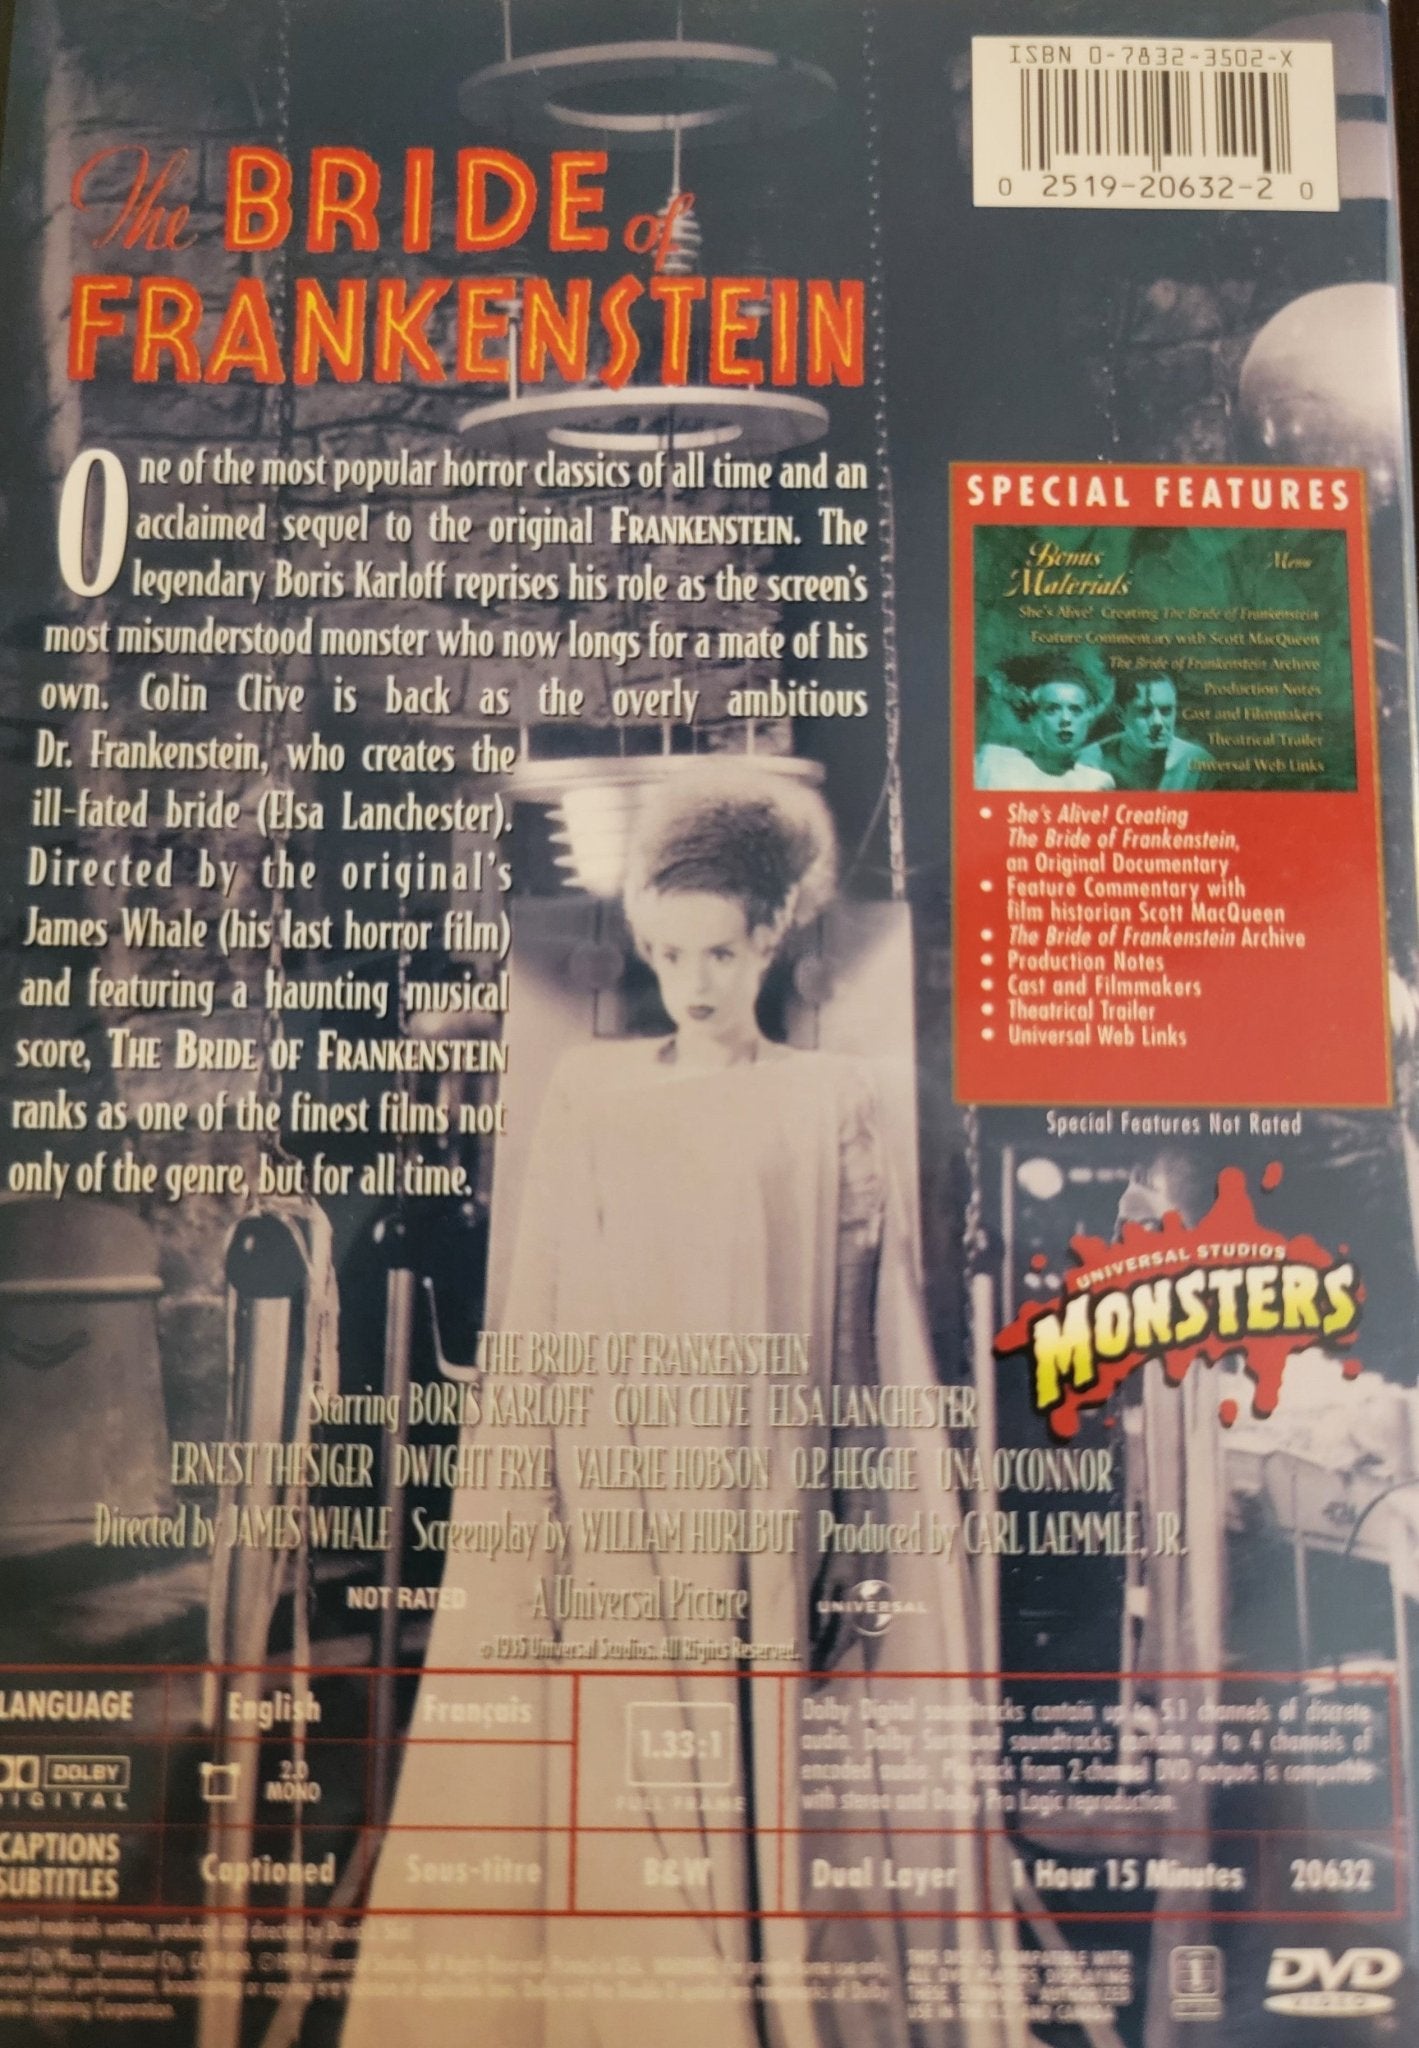 Universal Pictures Home Entertainment - The Bride of Frankenstein - Universal Studios Classic Monster Collection | DVD | Full Frame - DVD - Steady Bunny Shop